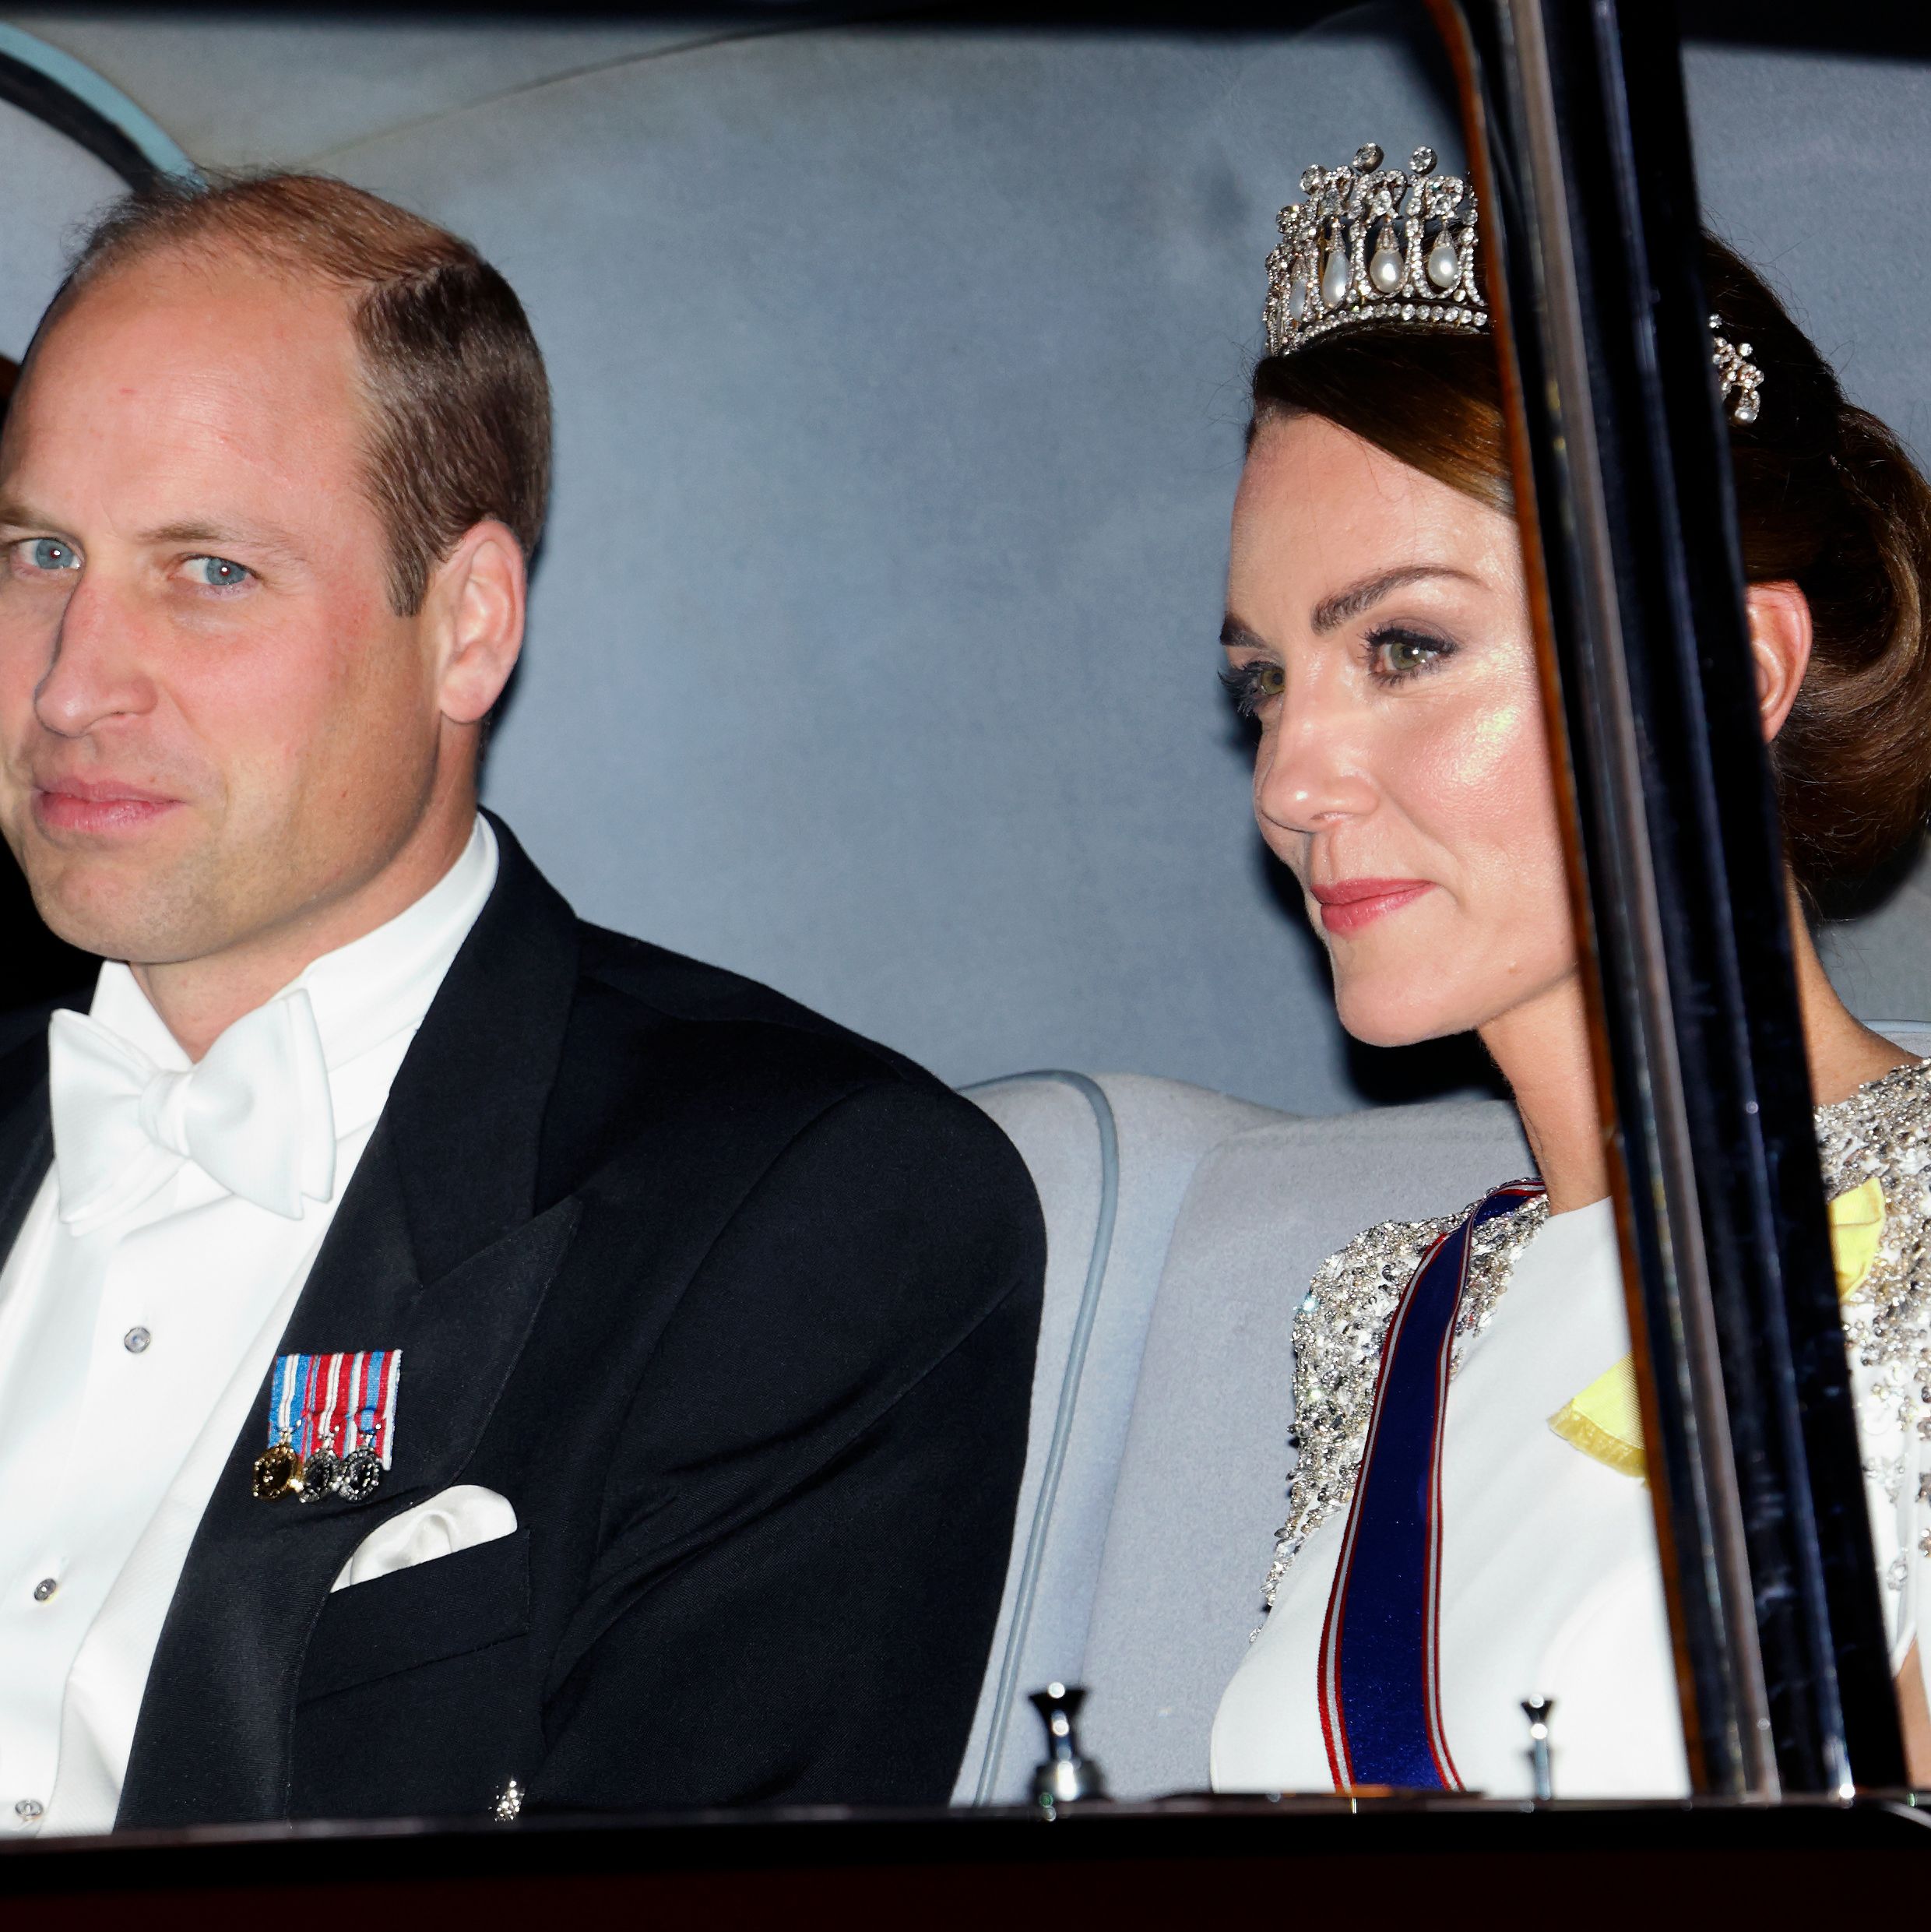 The Royals Followed Strict Protocol By Sitting Exactly 45 Centimeters Apart at a State Banquet Last Night